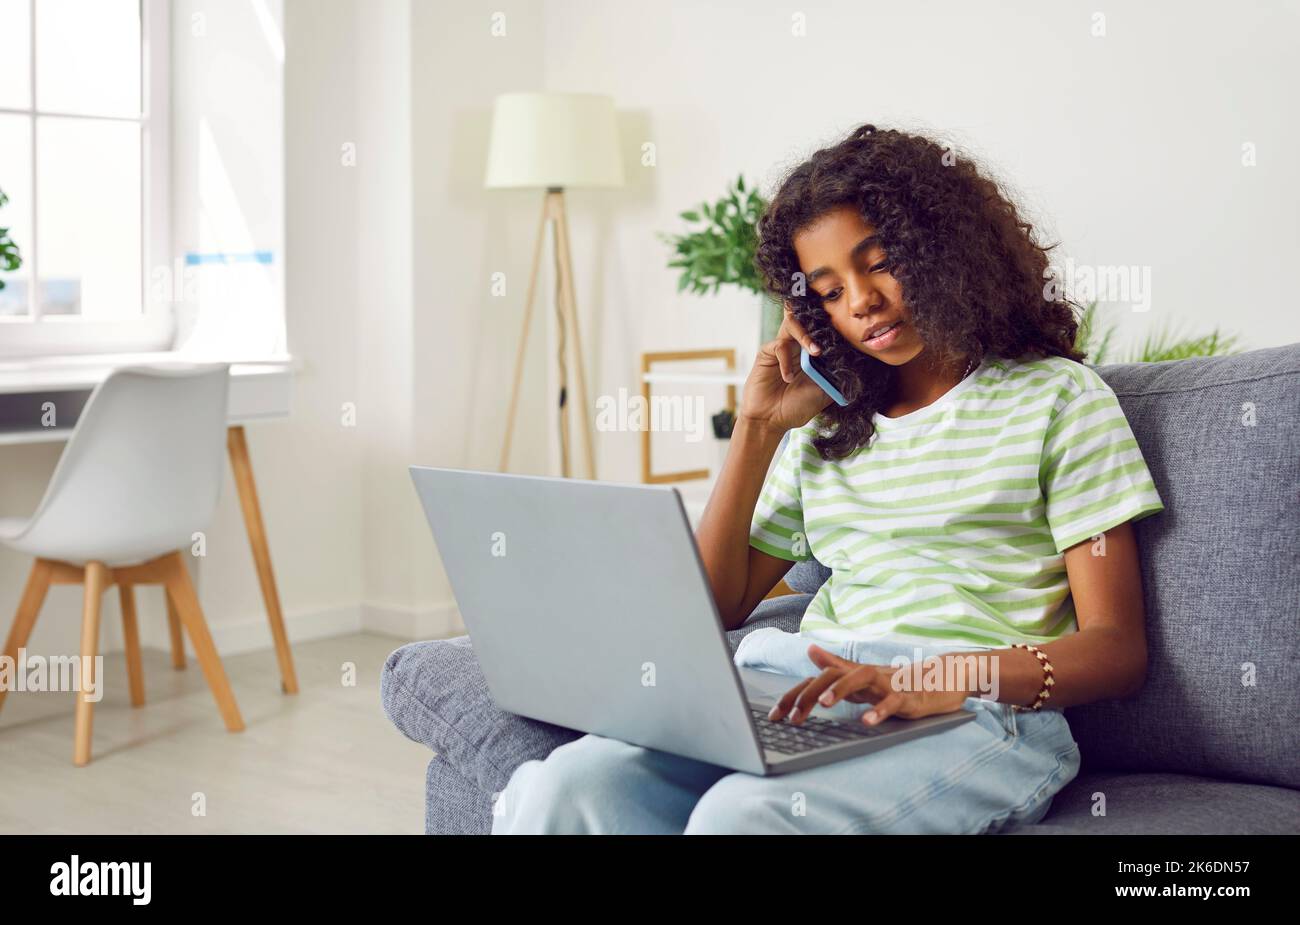 African america teen girl is calling mobile phone and using laptop sitting on couch at home. Stock Photo